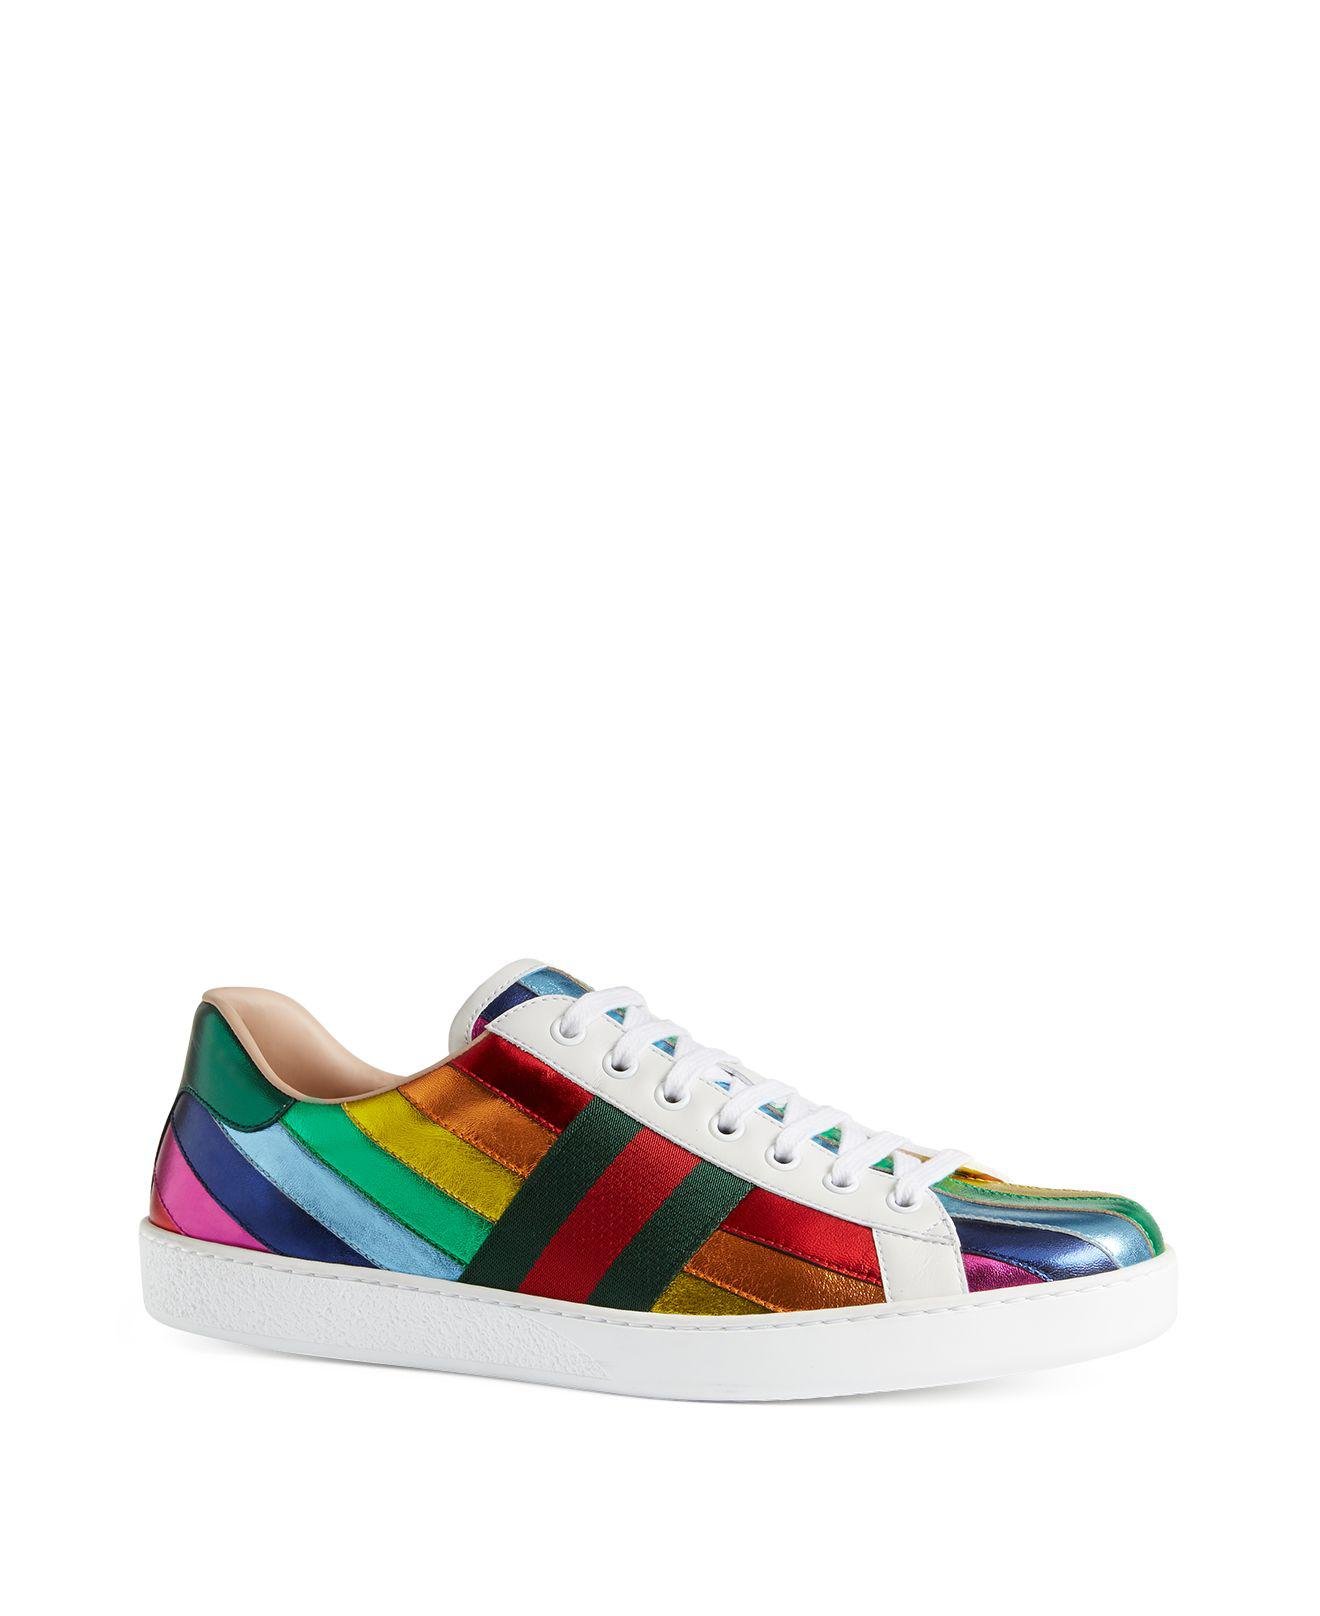 gucci rainbow shoes